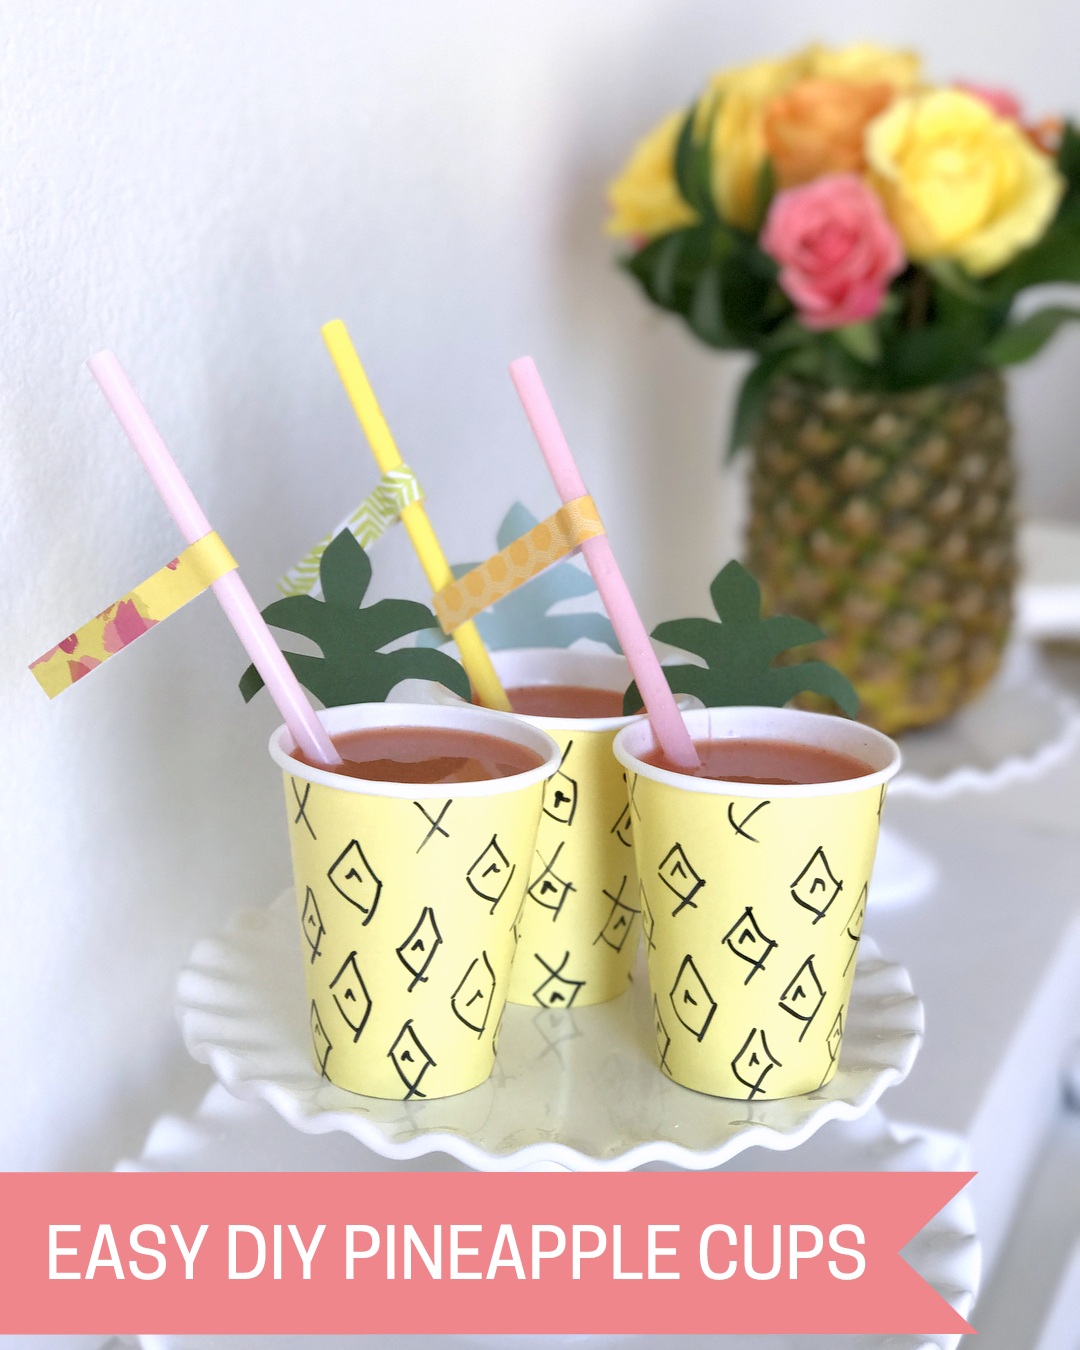 5 easy DIY moana party ideas (with tons of luau and pineapple party ideas)